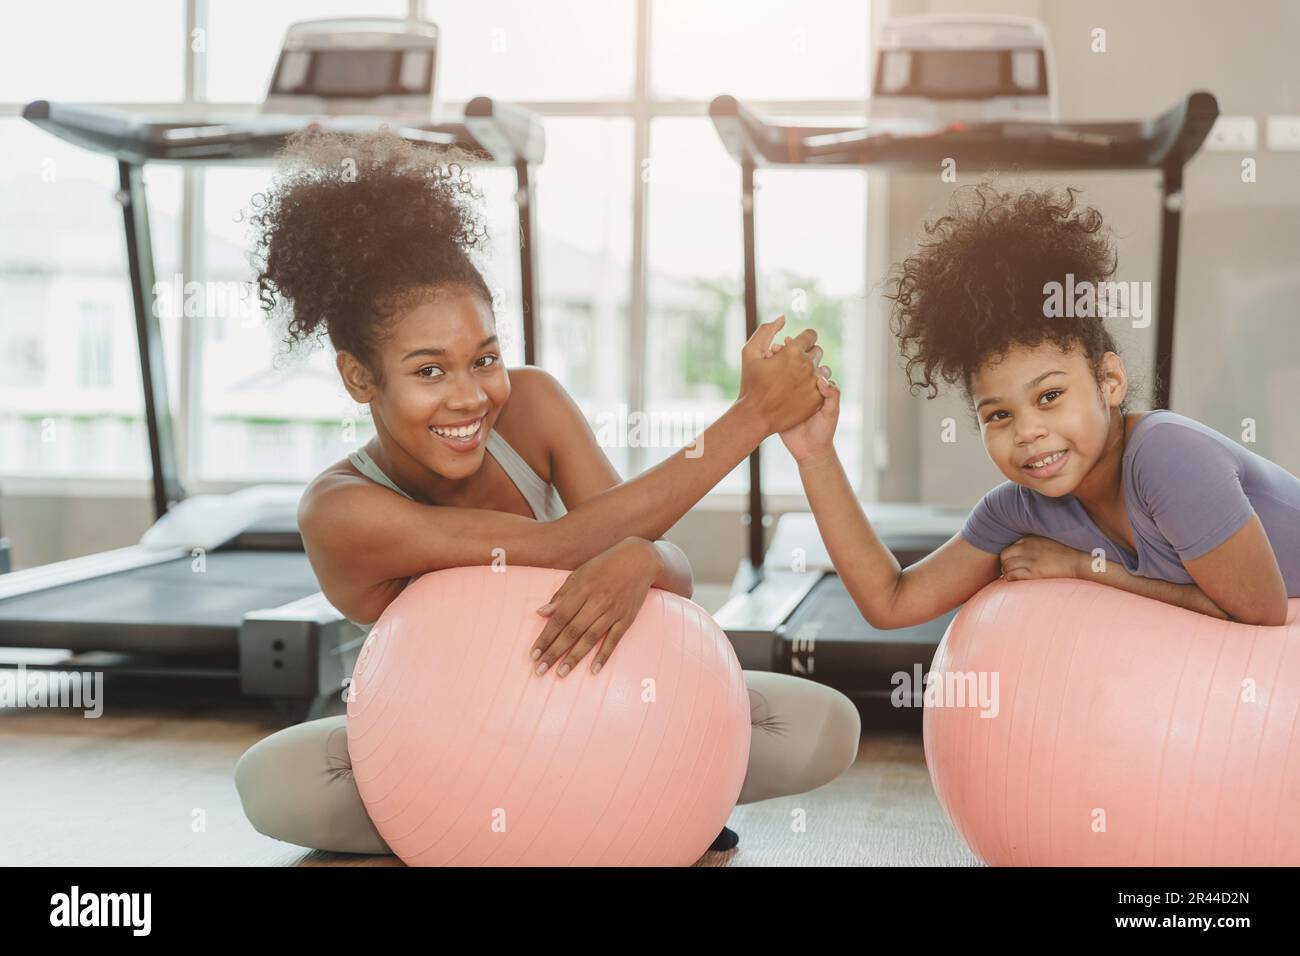 happy sport fitness healthy woman with child smiling in sport club treadmill background Stock Photo